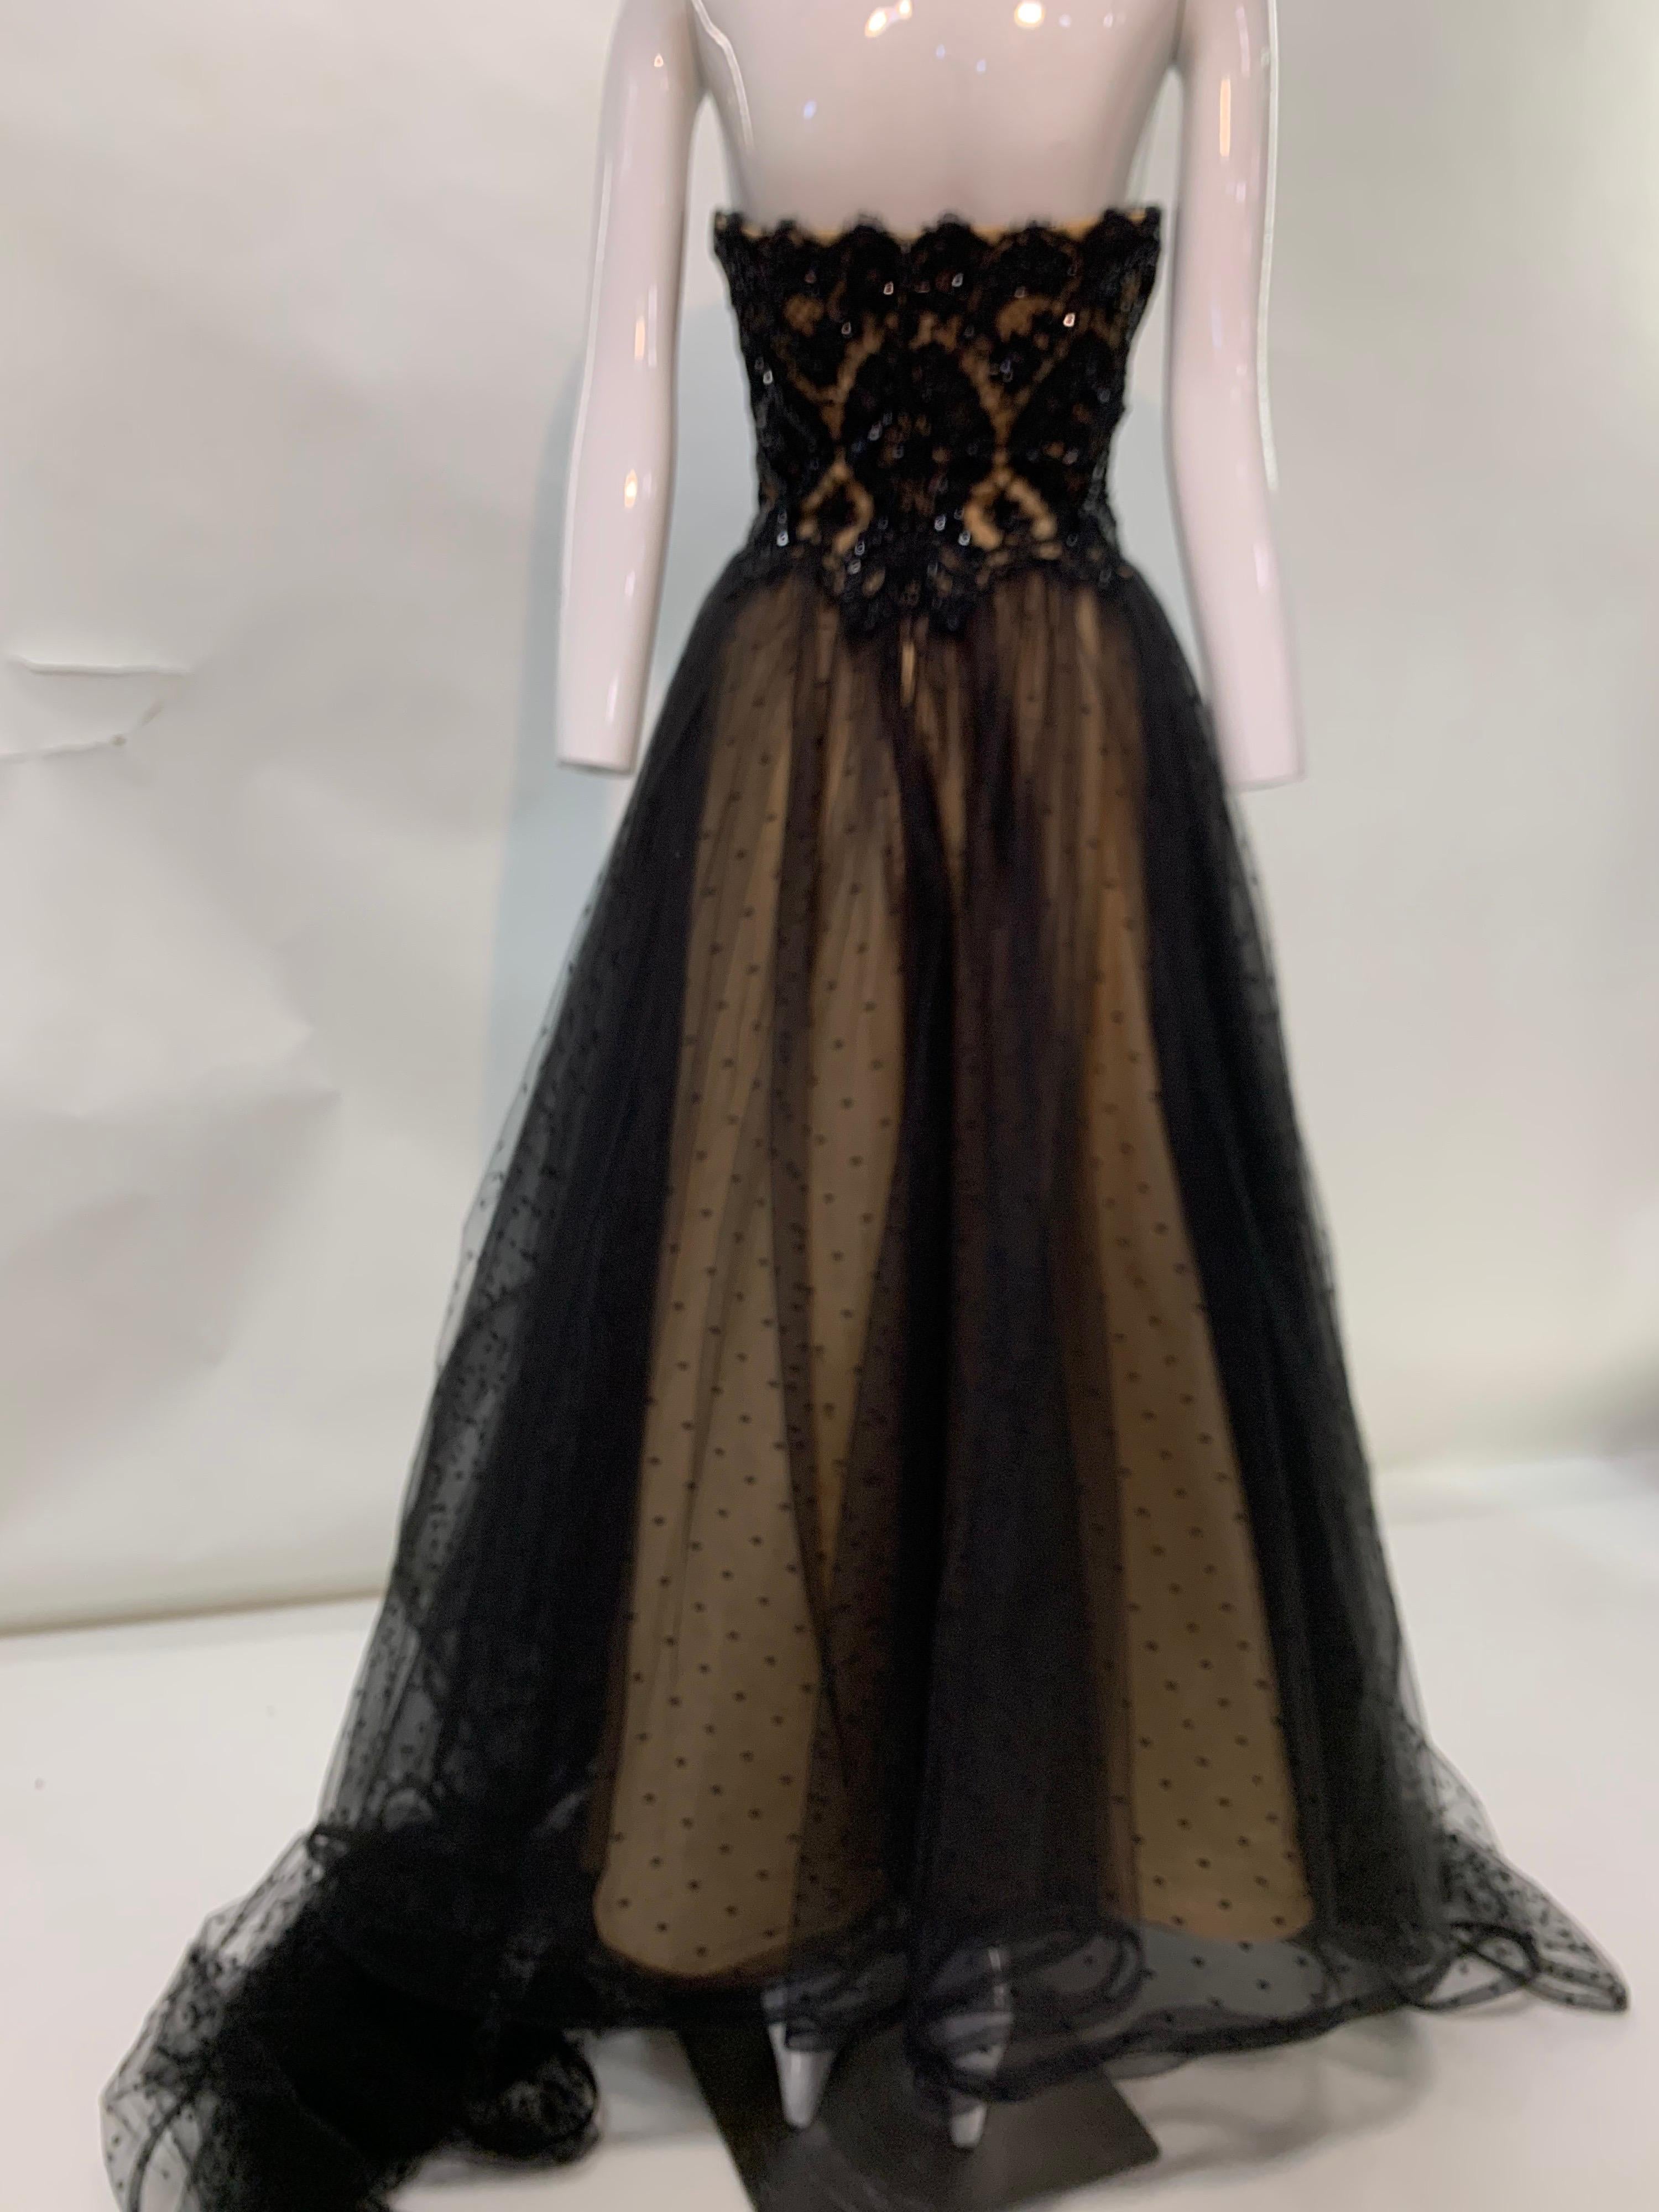 1980 Albert Capraro Couture Black Tulle & Beaded Lace Strapless Gown w/ Foulard 8